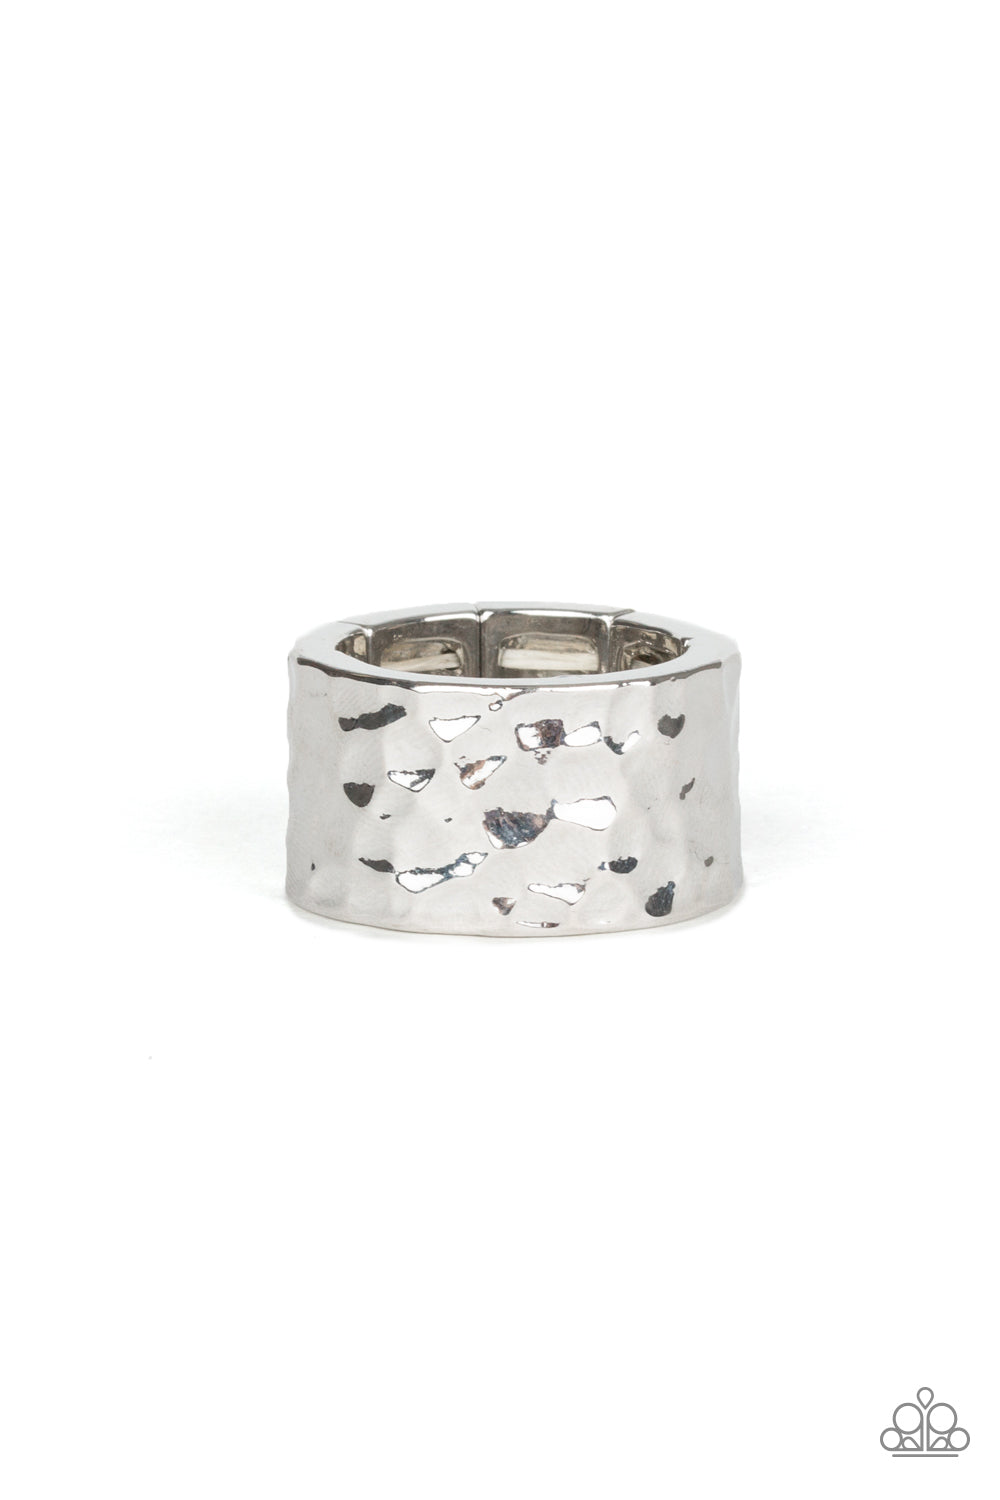 Self-Made Man Silver Urban Ring - Paparazzi Accessories A thick silver band has been hammered in shimmery detail for a metro inspired look. Features a stretchy band for a flexible fit.   Sold as one individual ring.